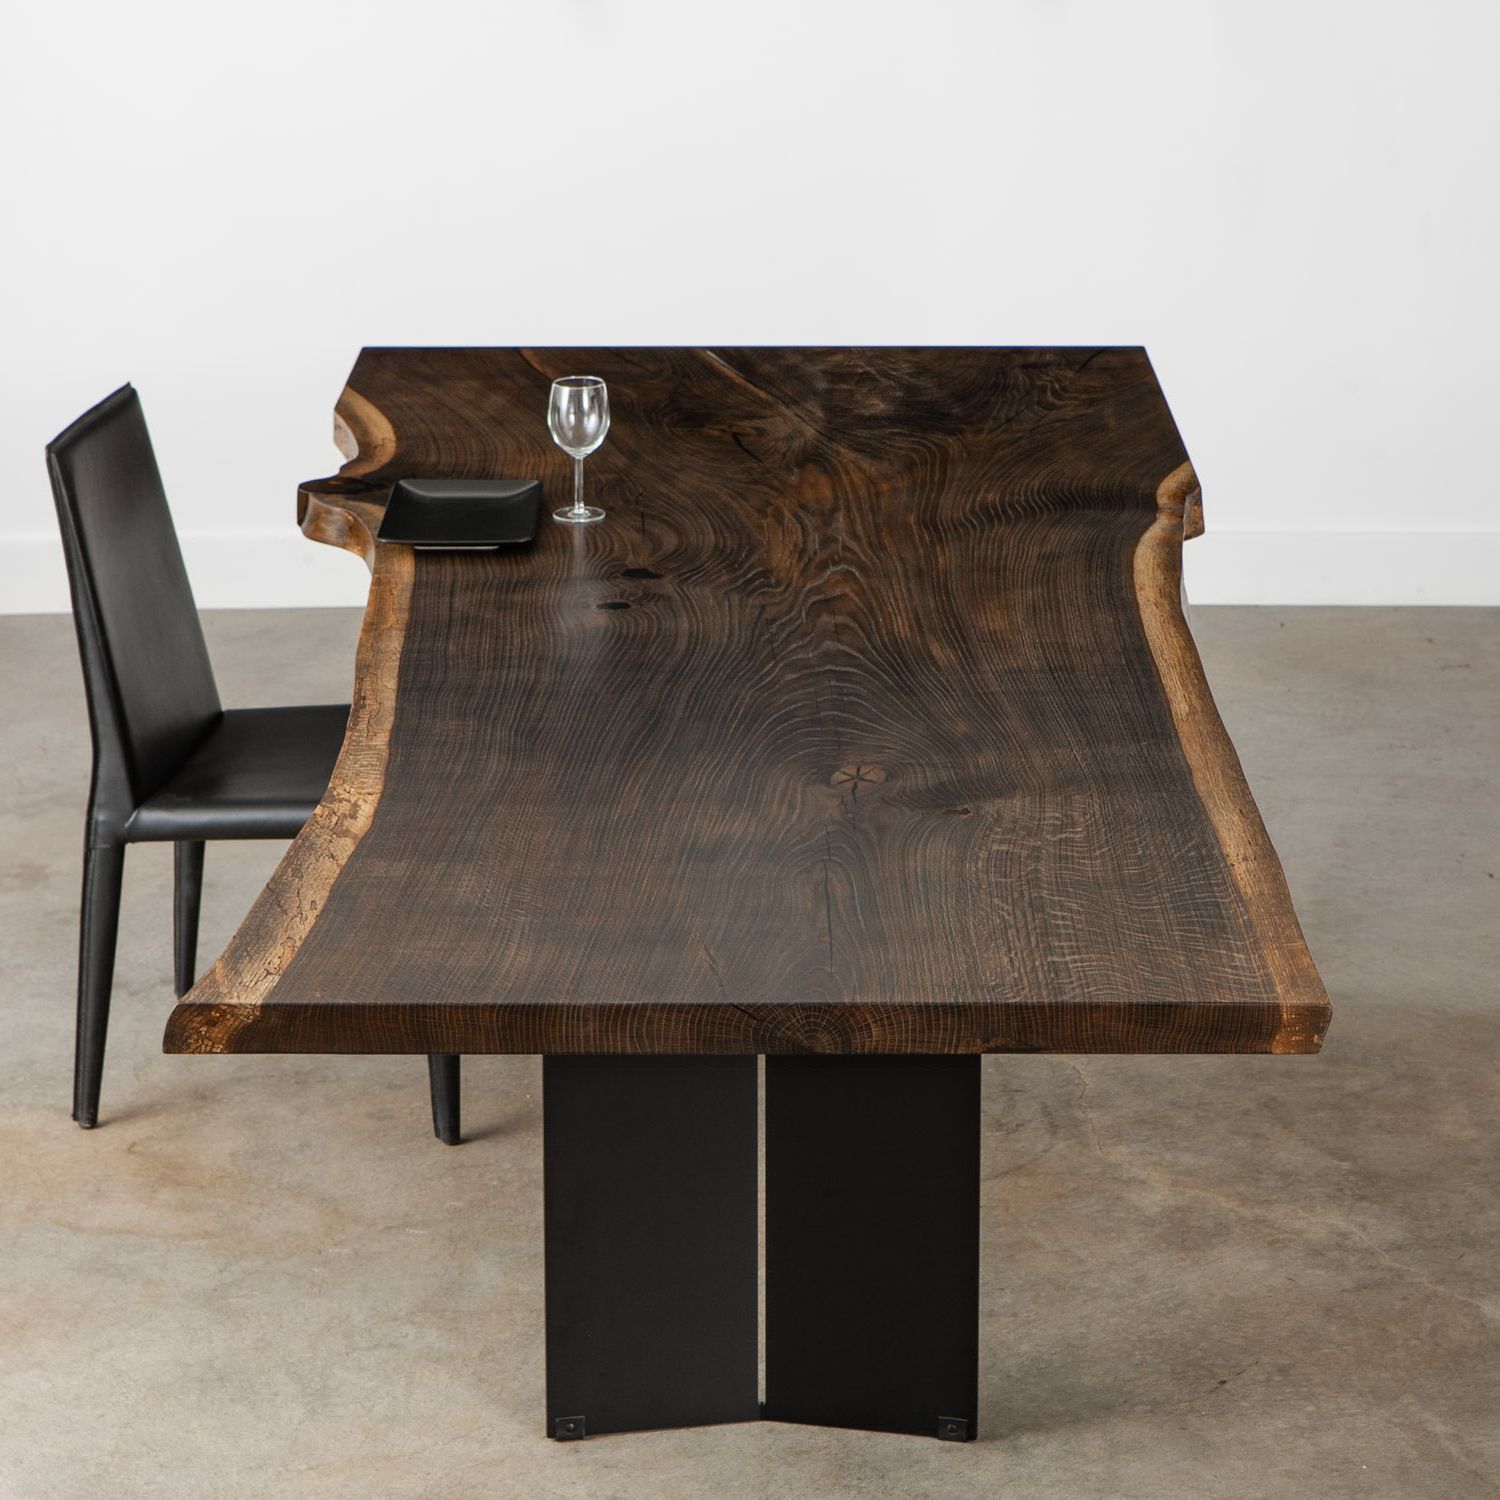 Modern Live Edge Throughout Widely Used Oxidized Coffee Tables (View 1 of 10)